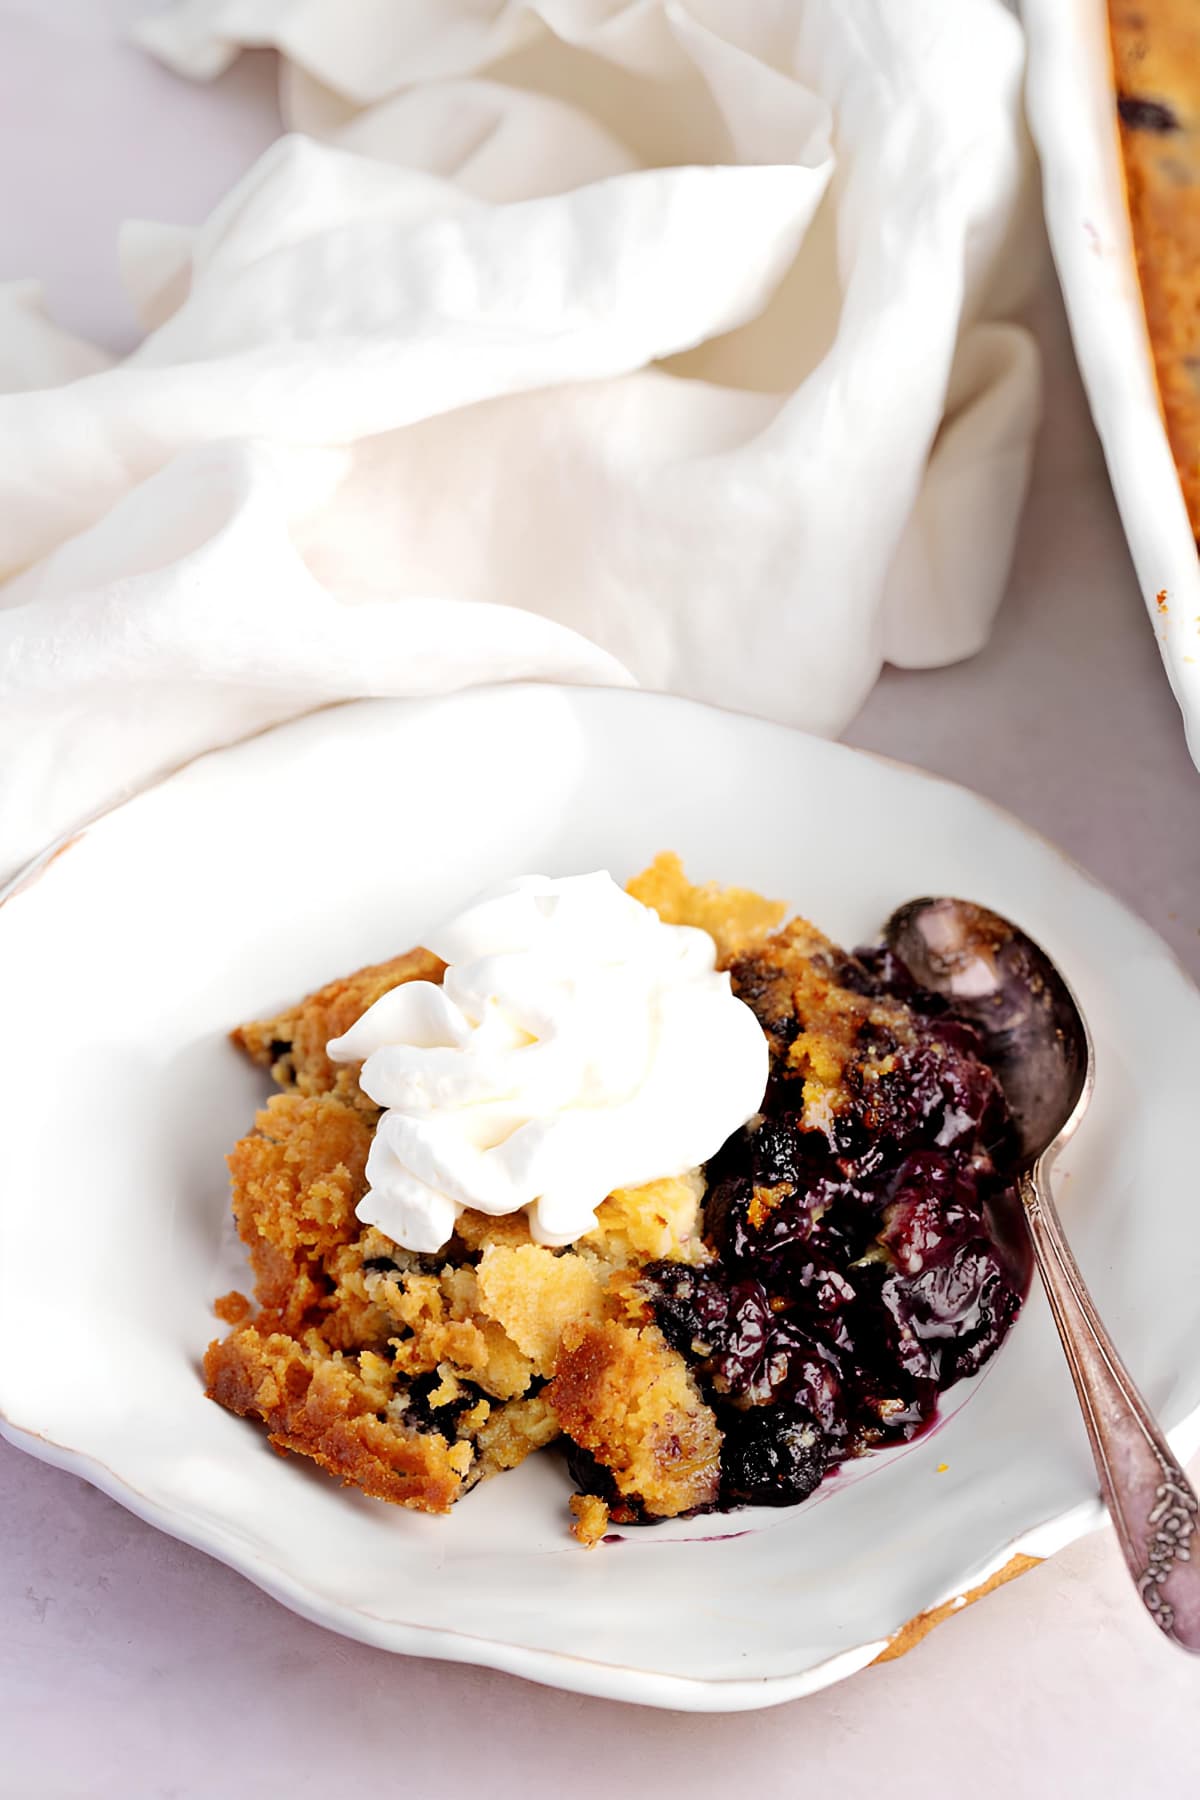 Sweet and Soft Homemade Blueberry Dump Cake with Whipped Cream